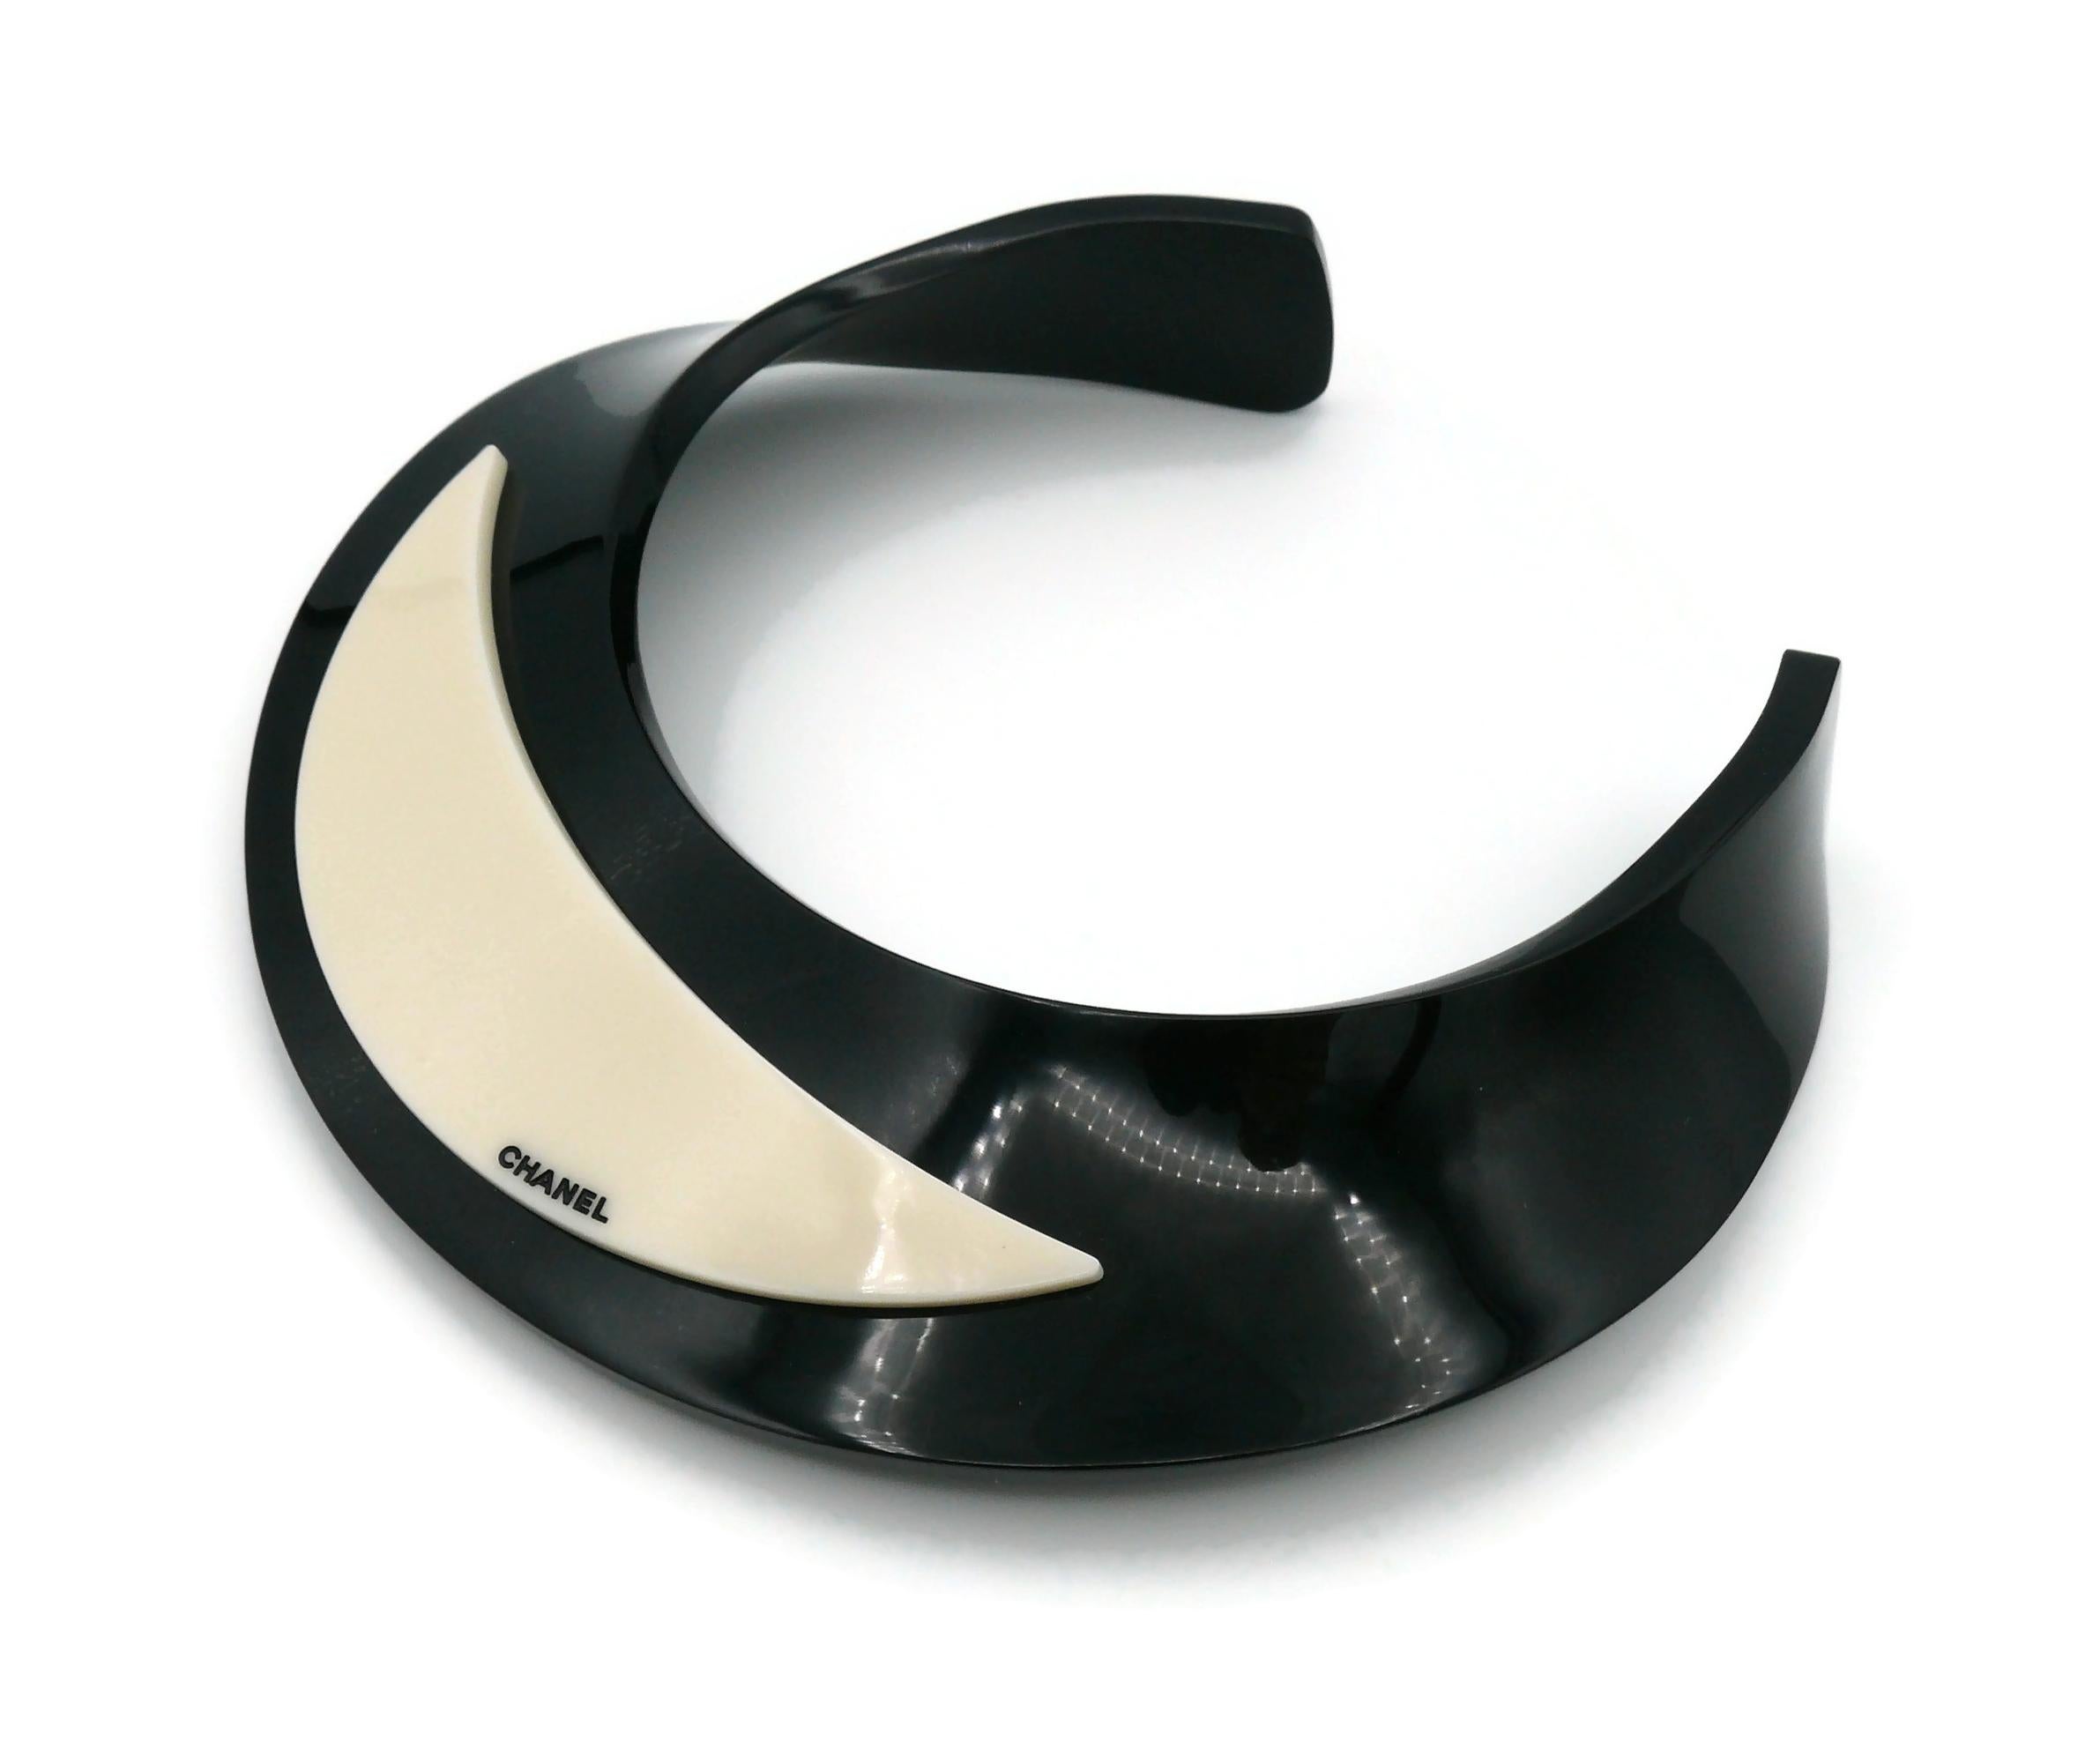 CHANEL by KARL LAGERFELD Black and White Resin Choker Necklace, Fall 2007 For Sale 1